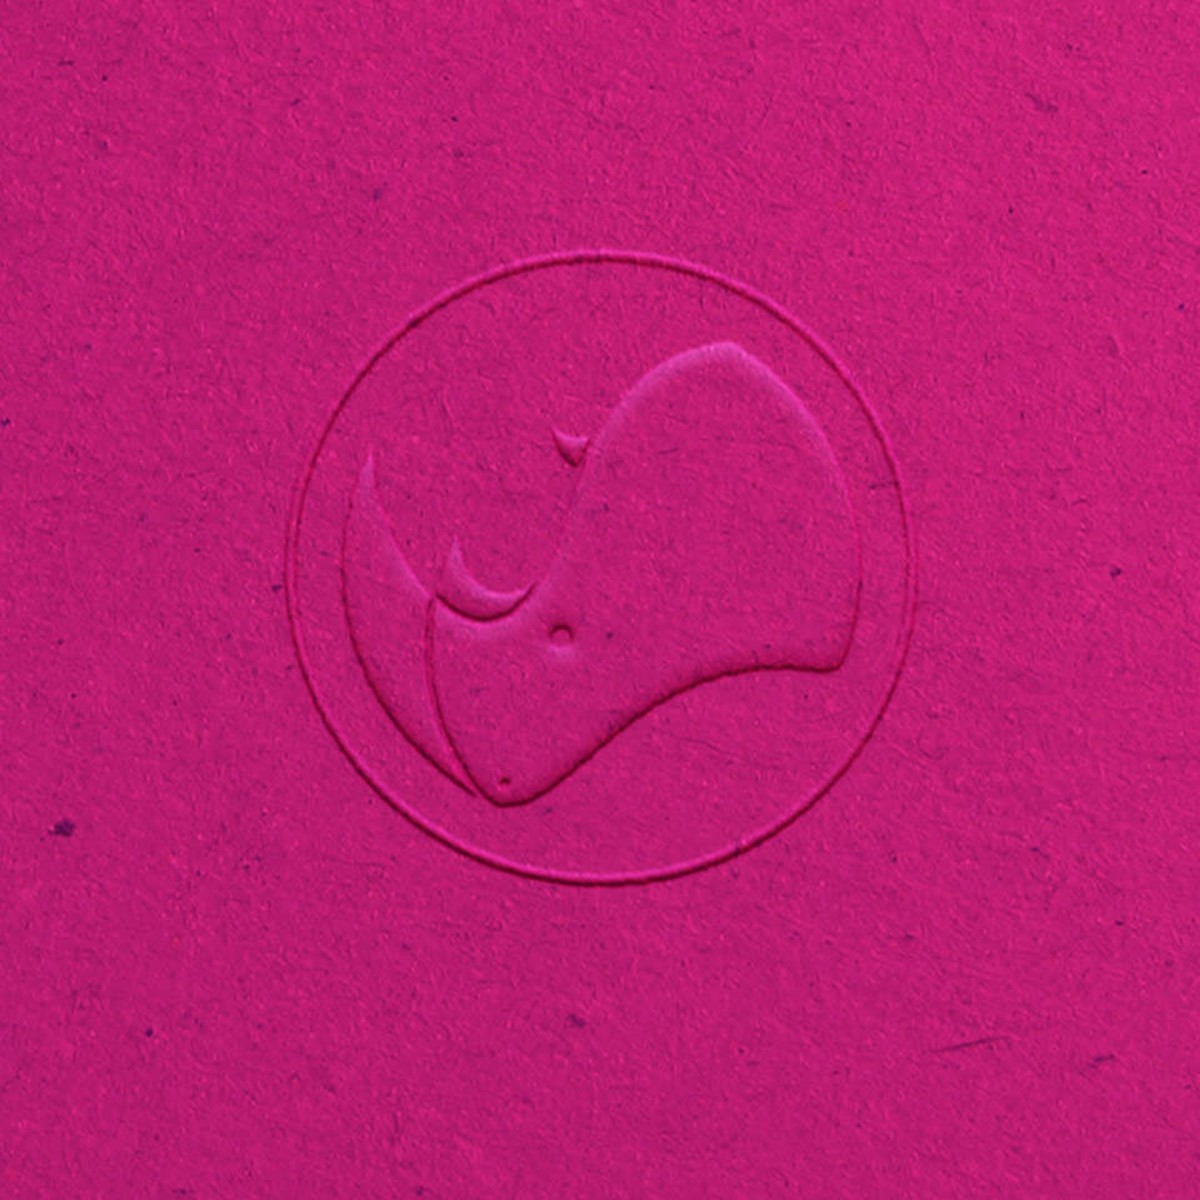 Rhino Recovery Fund. Logo embossed on uncoated paper stock. Brand identity designed by Superfried.